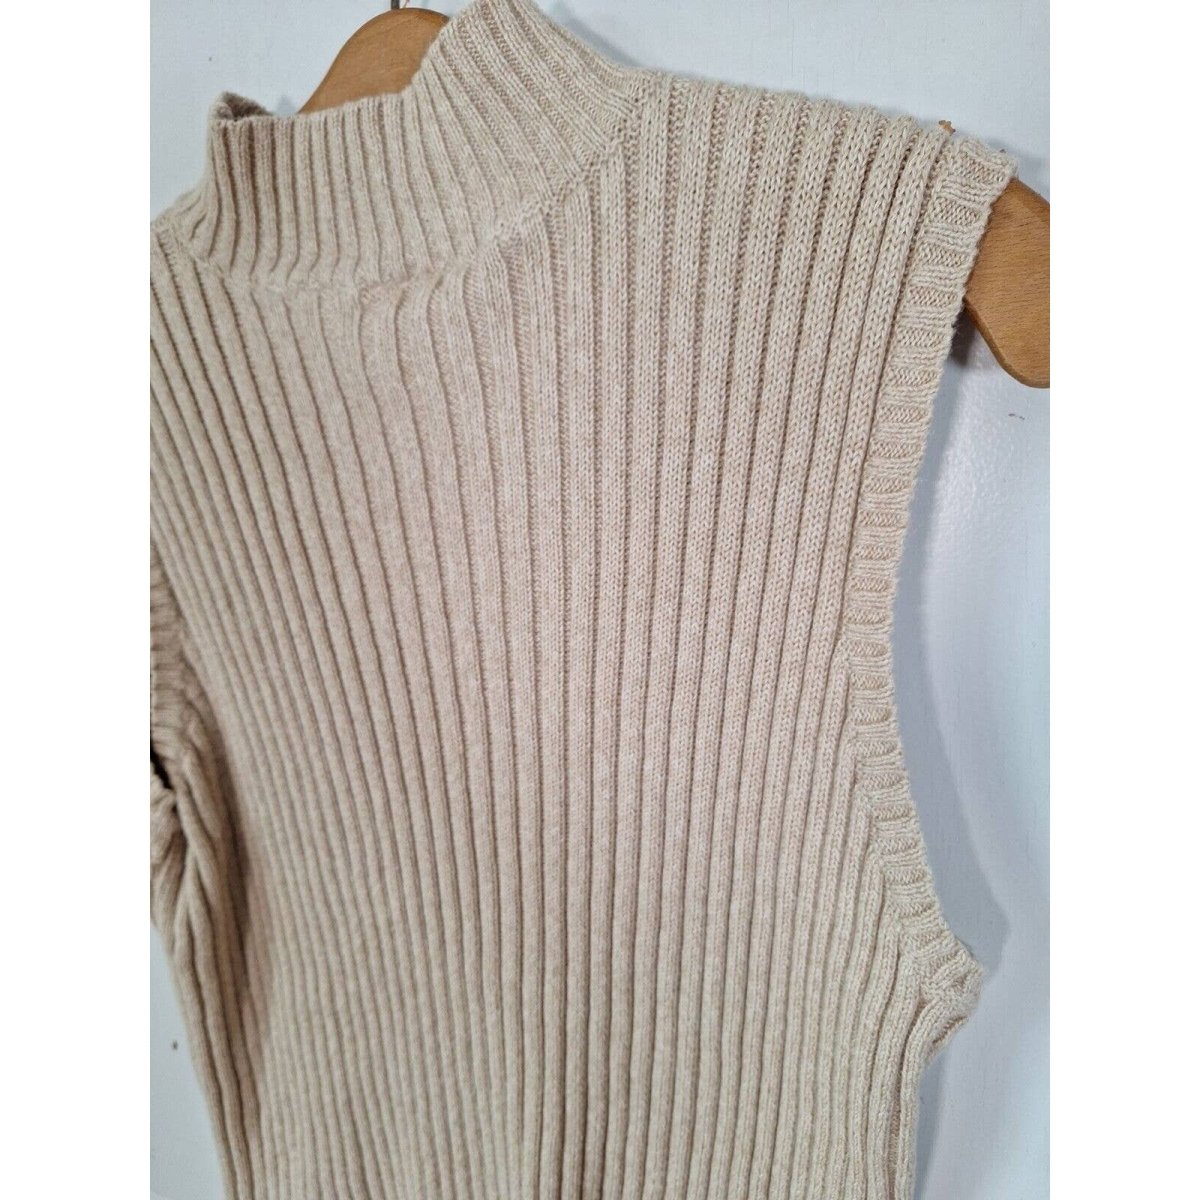 90s/Y2K Beige Ramie Cableknit Mockneck Top Women's Size XL Chest 42" to 52" - themallvintage The Mall Vintage